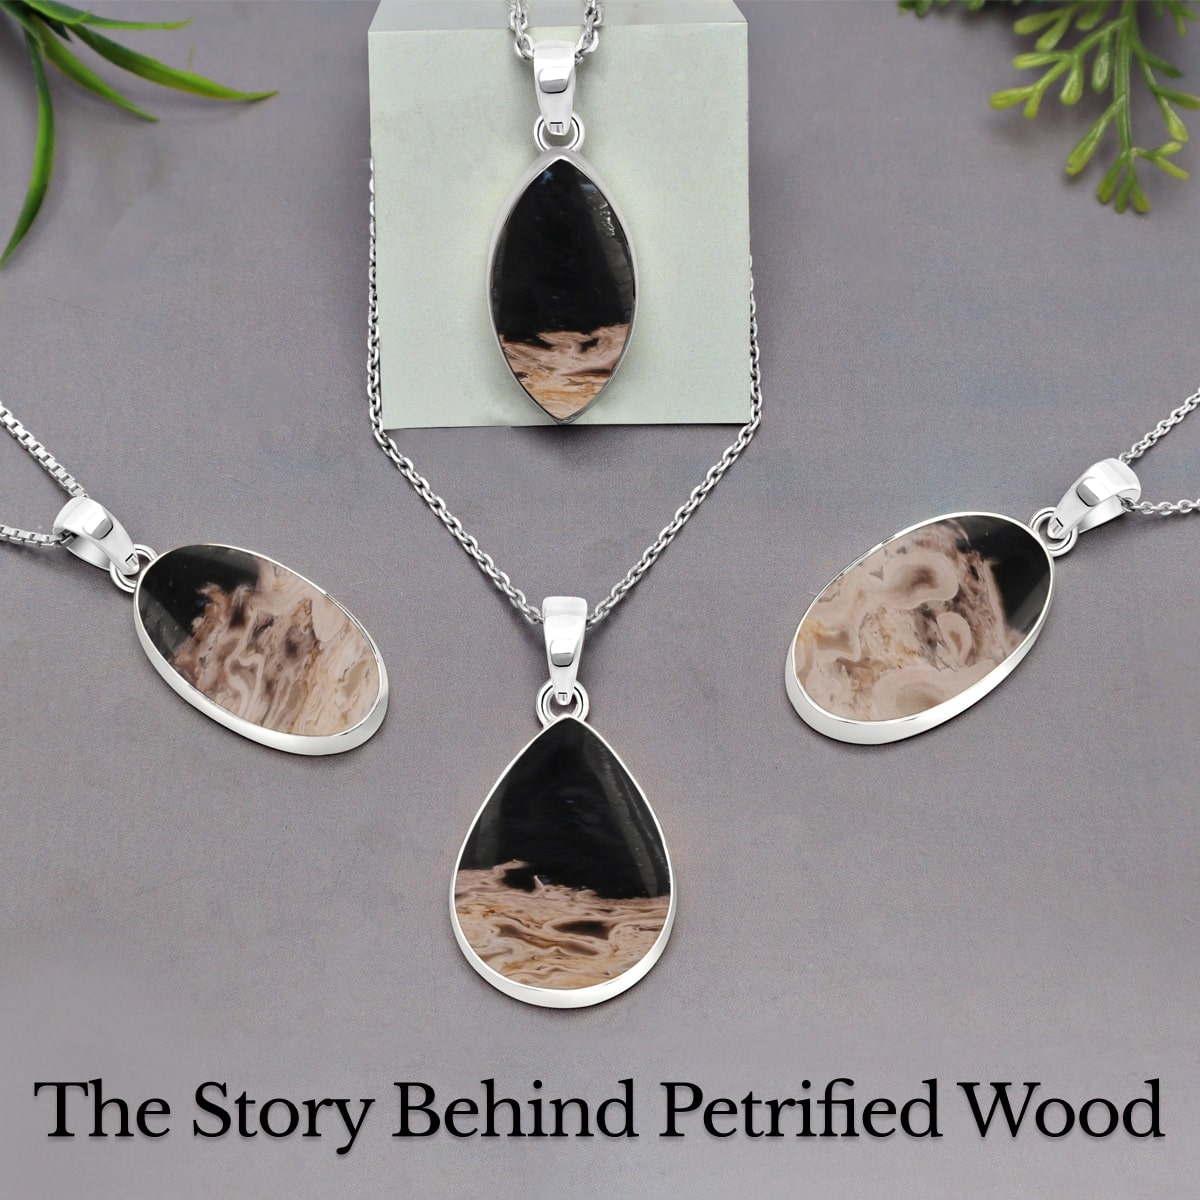 Petrified Wood Meaning, History, Healing Properties, Uses and Cleansing